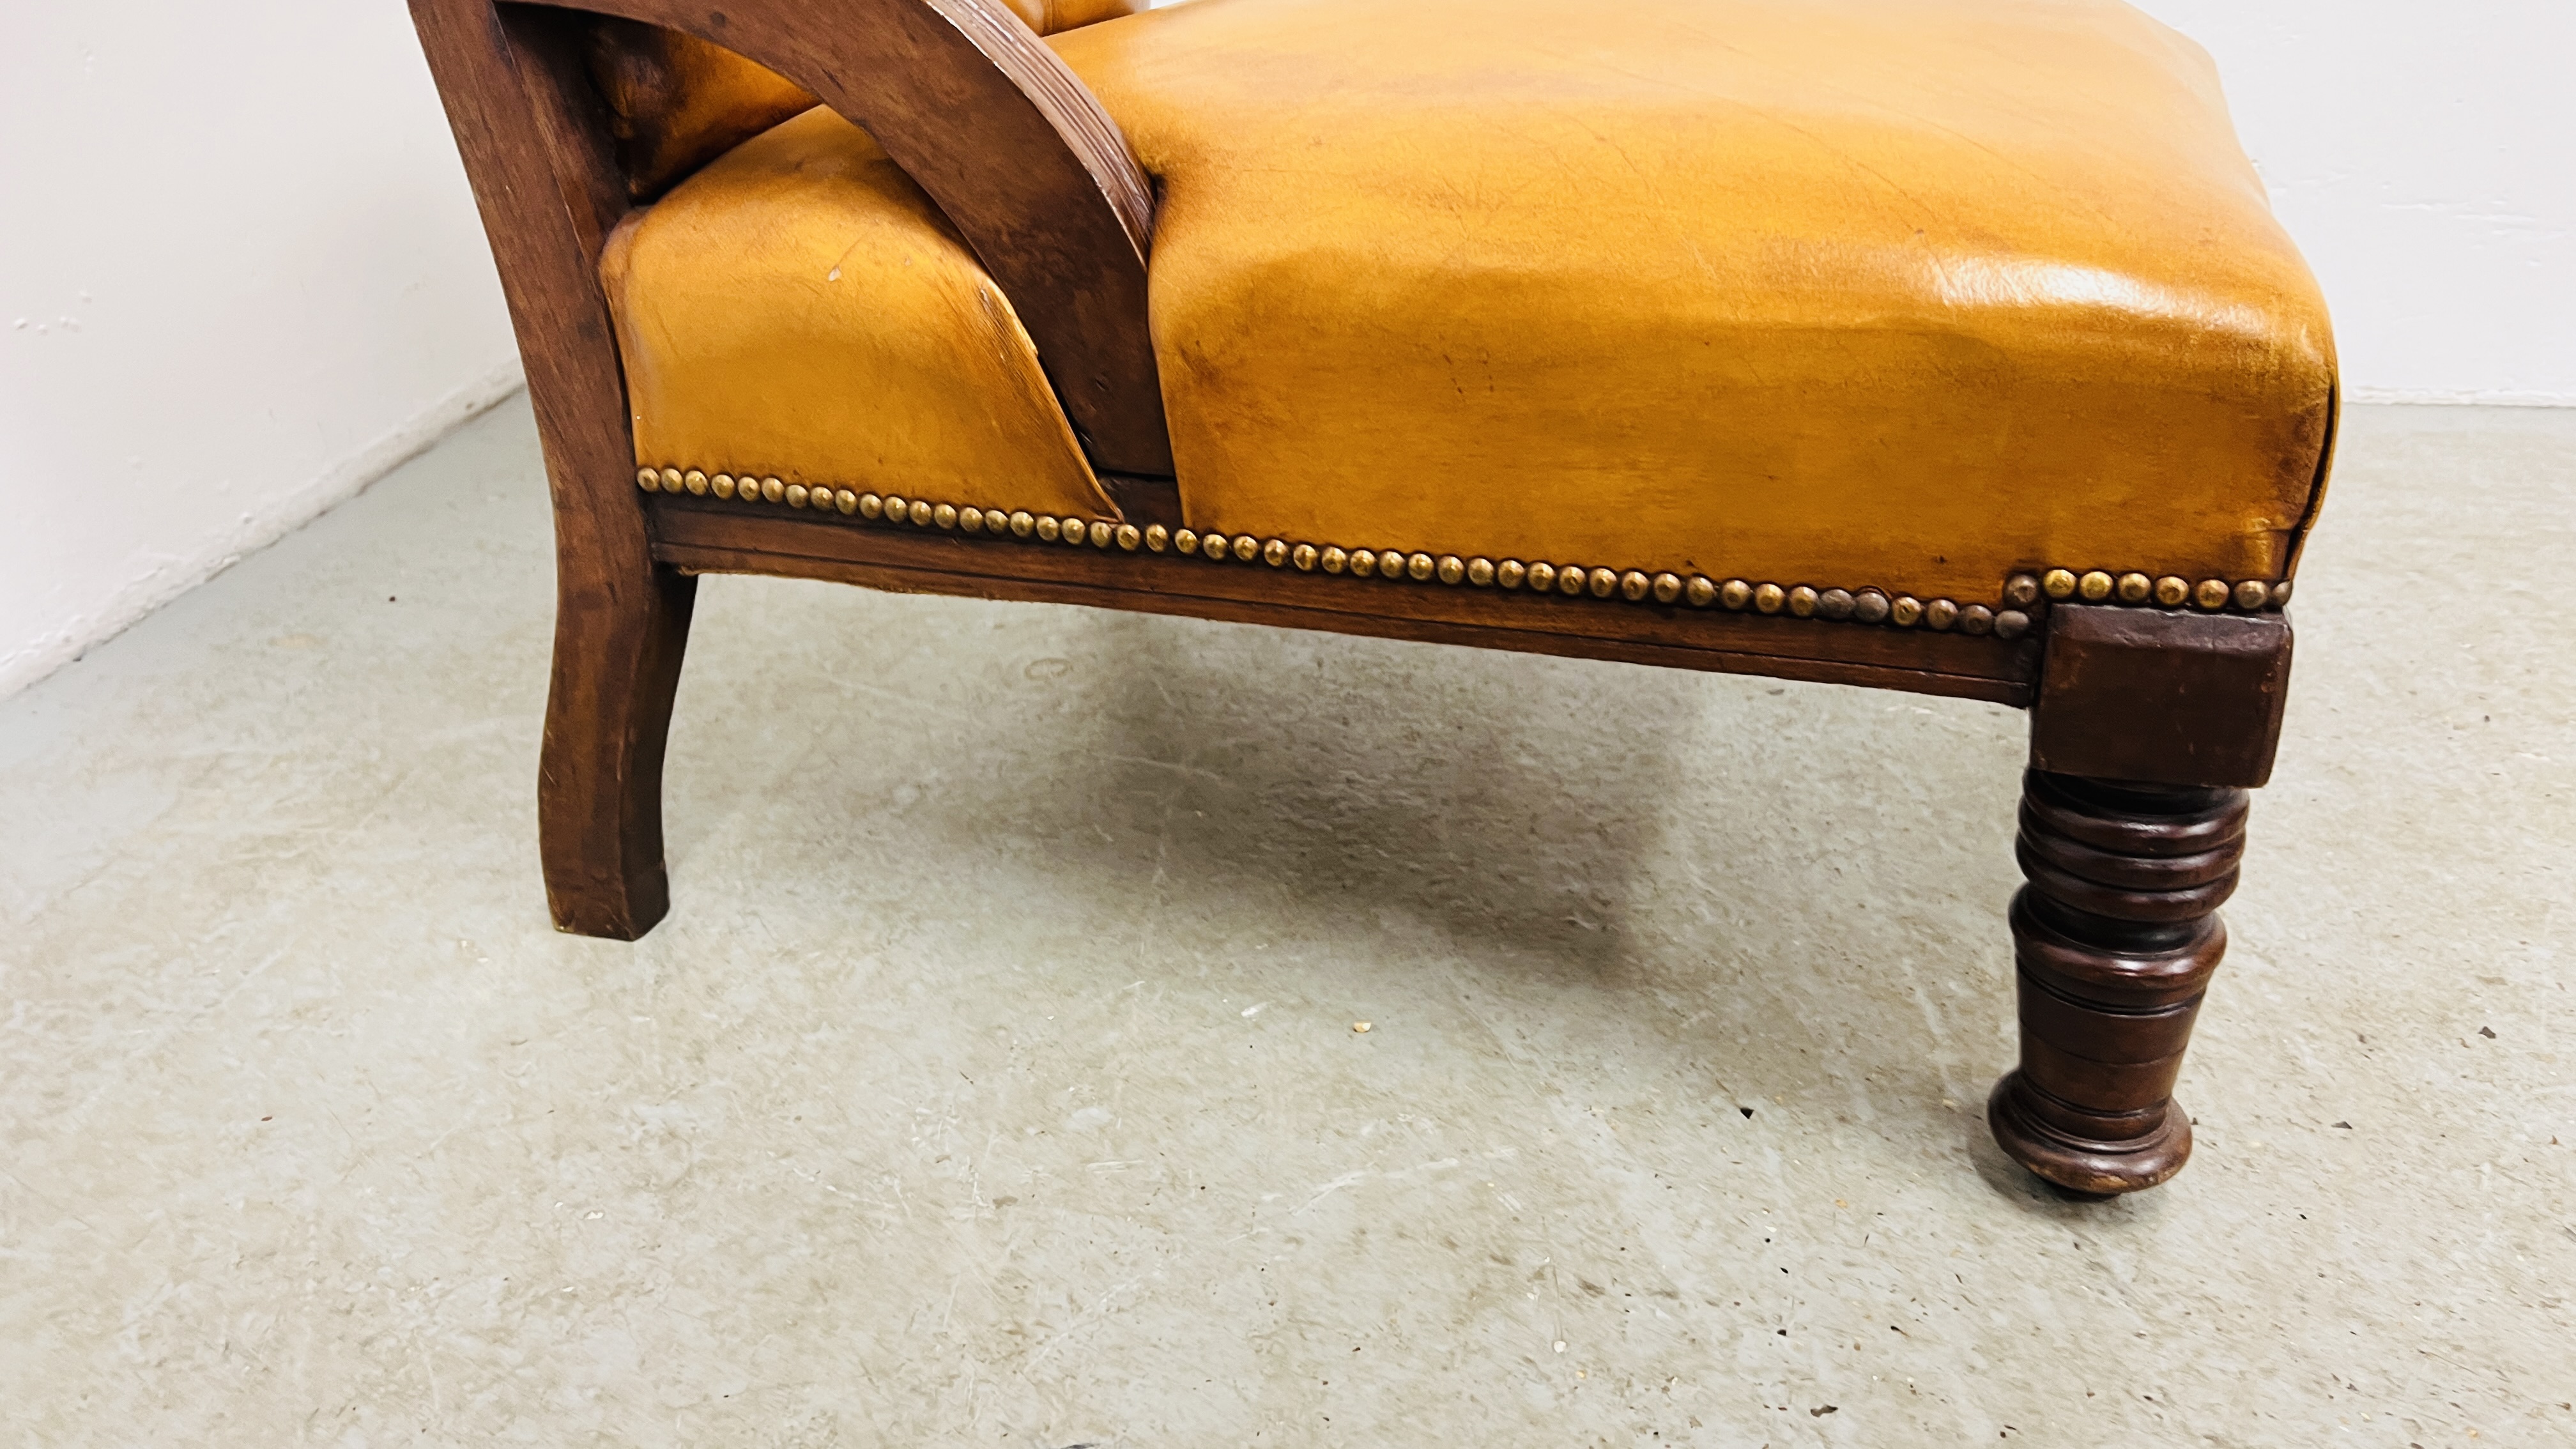 ANTIQUE EDWARDIAN MAHOGANY LOW CHAIR UPHOLSTERED IN TAN LEATHER - BUTTON BACK. - Image 7 of 12